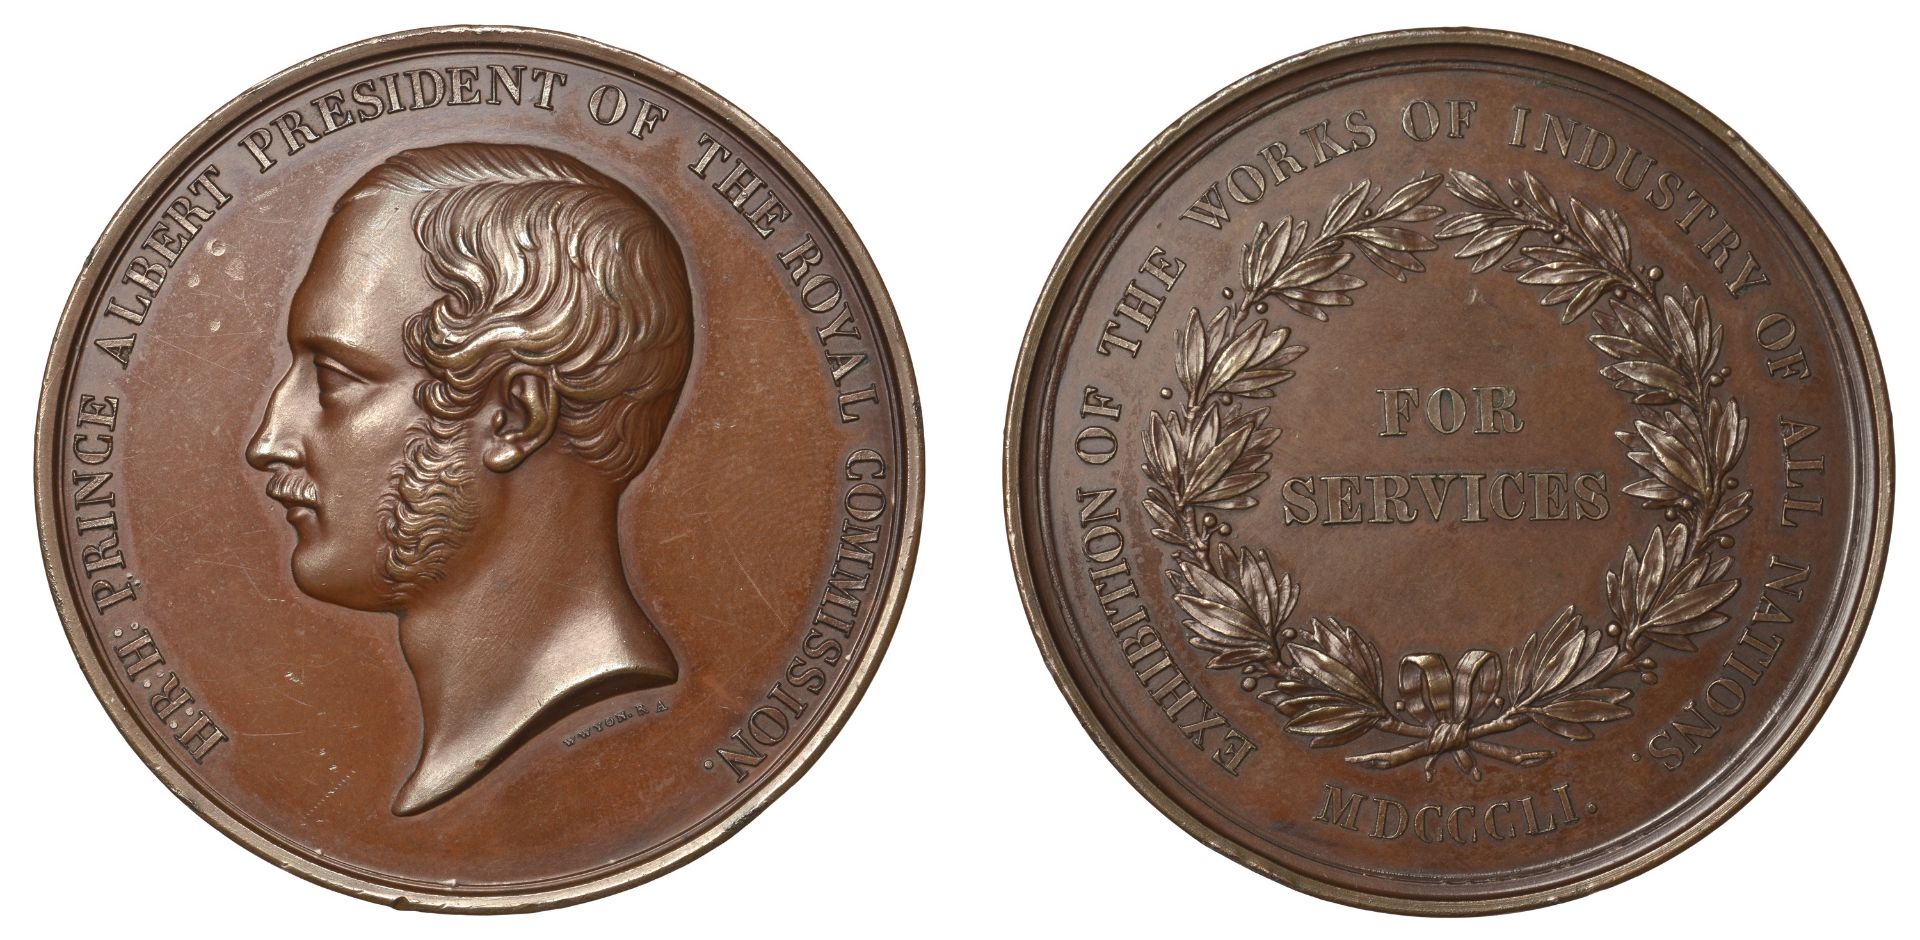 Great Exhibition, Hyde Park, 1851, For Services, a copper award medal by W. Wyon, similar, e...